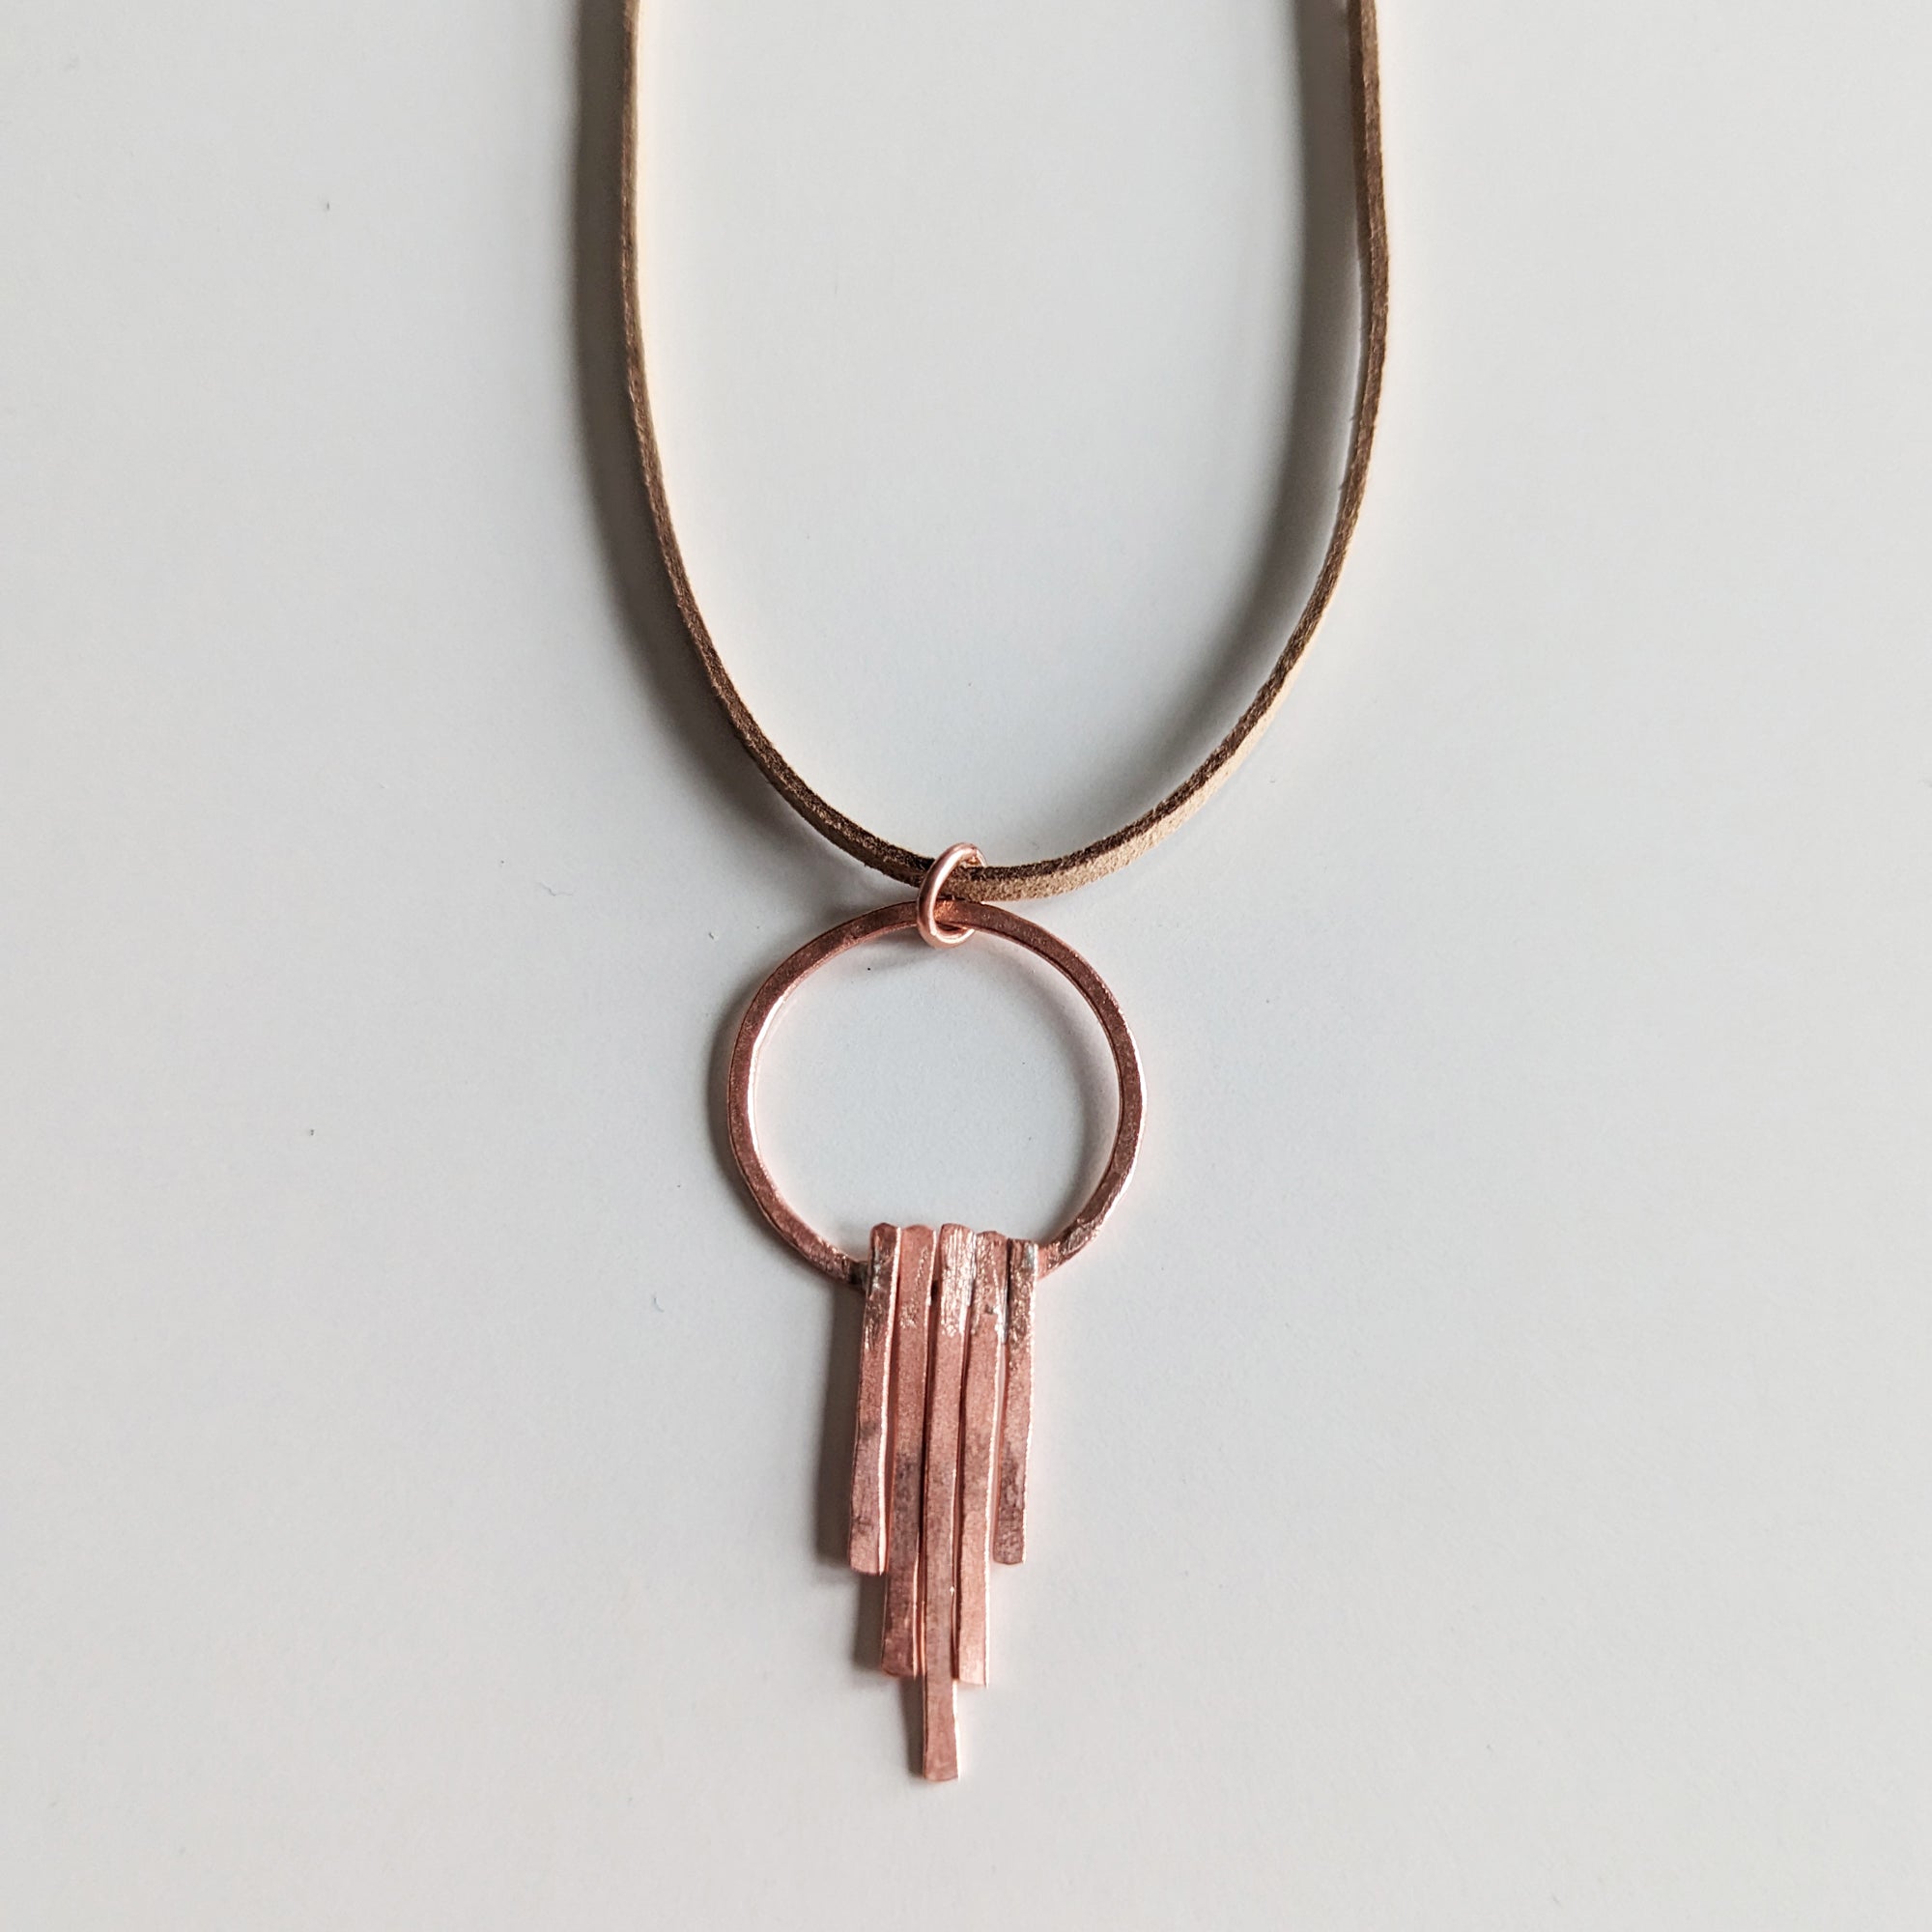 The Copper Hoop Point Necklace